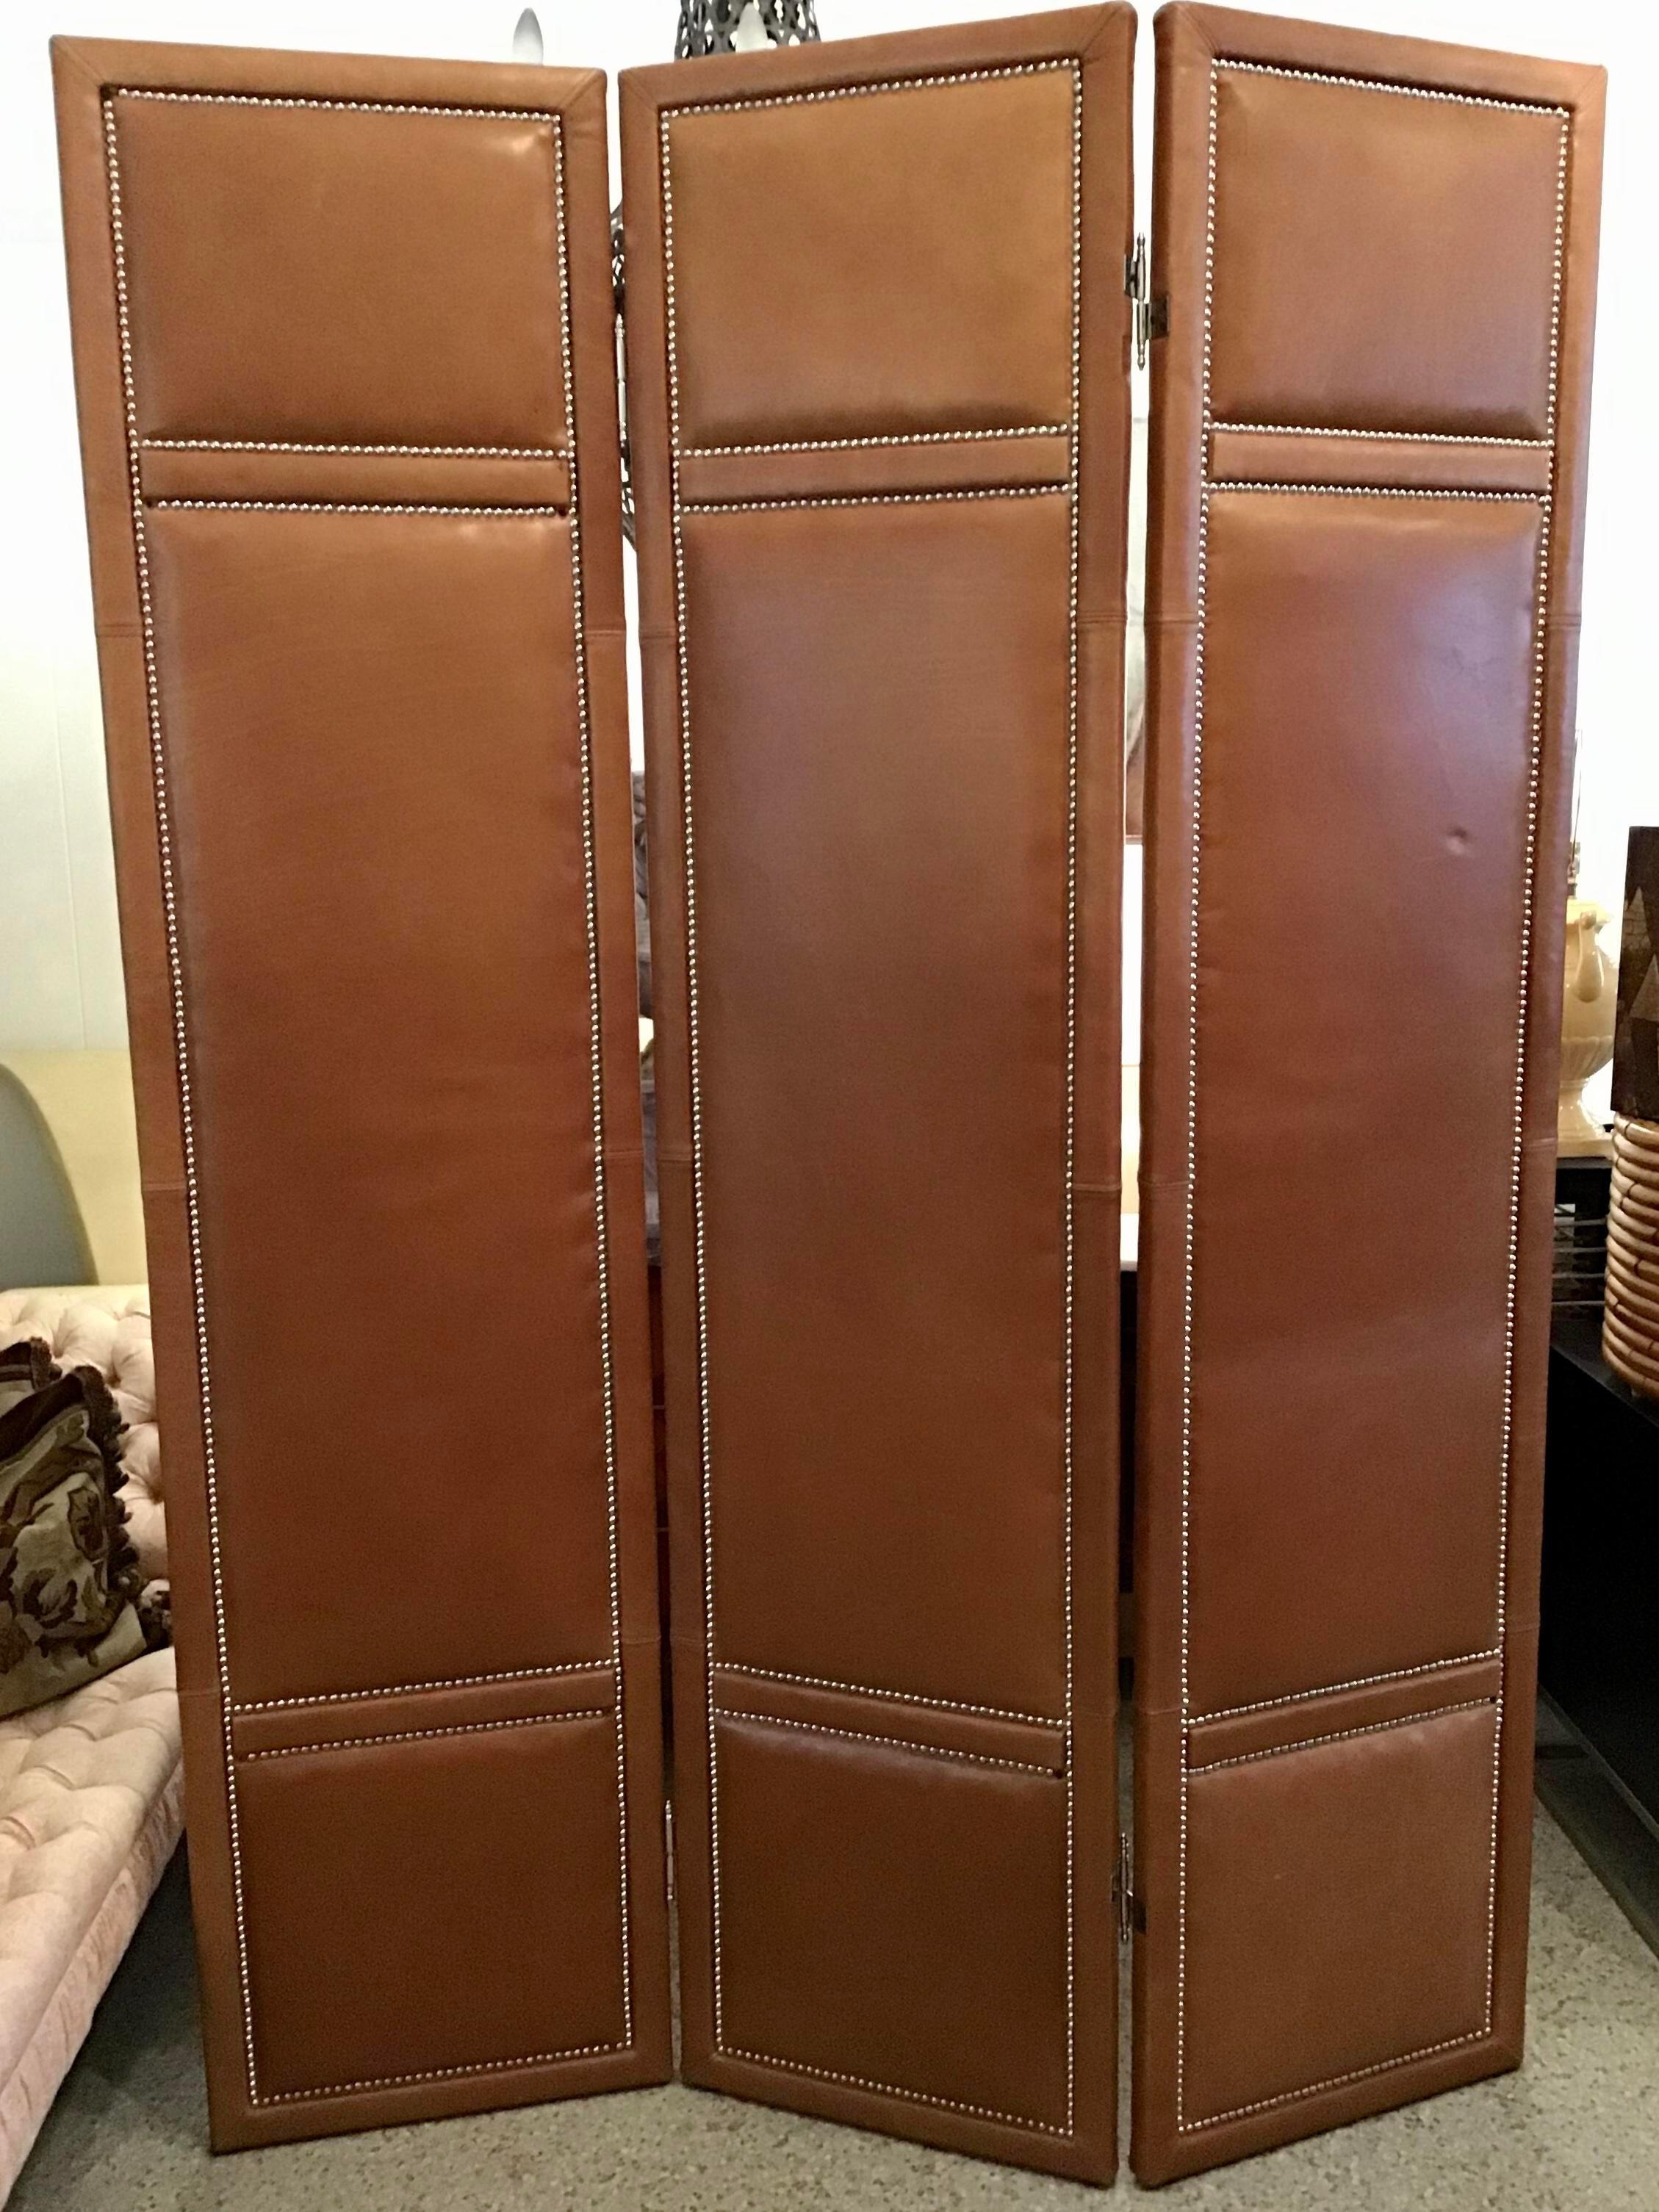 Fabulous 3 Panel custom leather folding screen with Chrome nailheads. This screen is extremely well made with very high quality leather. The screen would work well as a room divider or back drop to beautiful furnishings. 

Additional